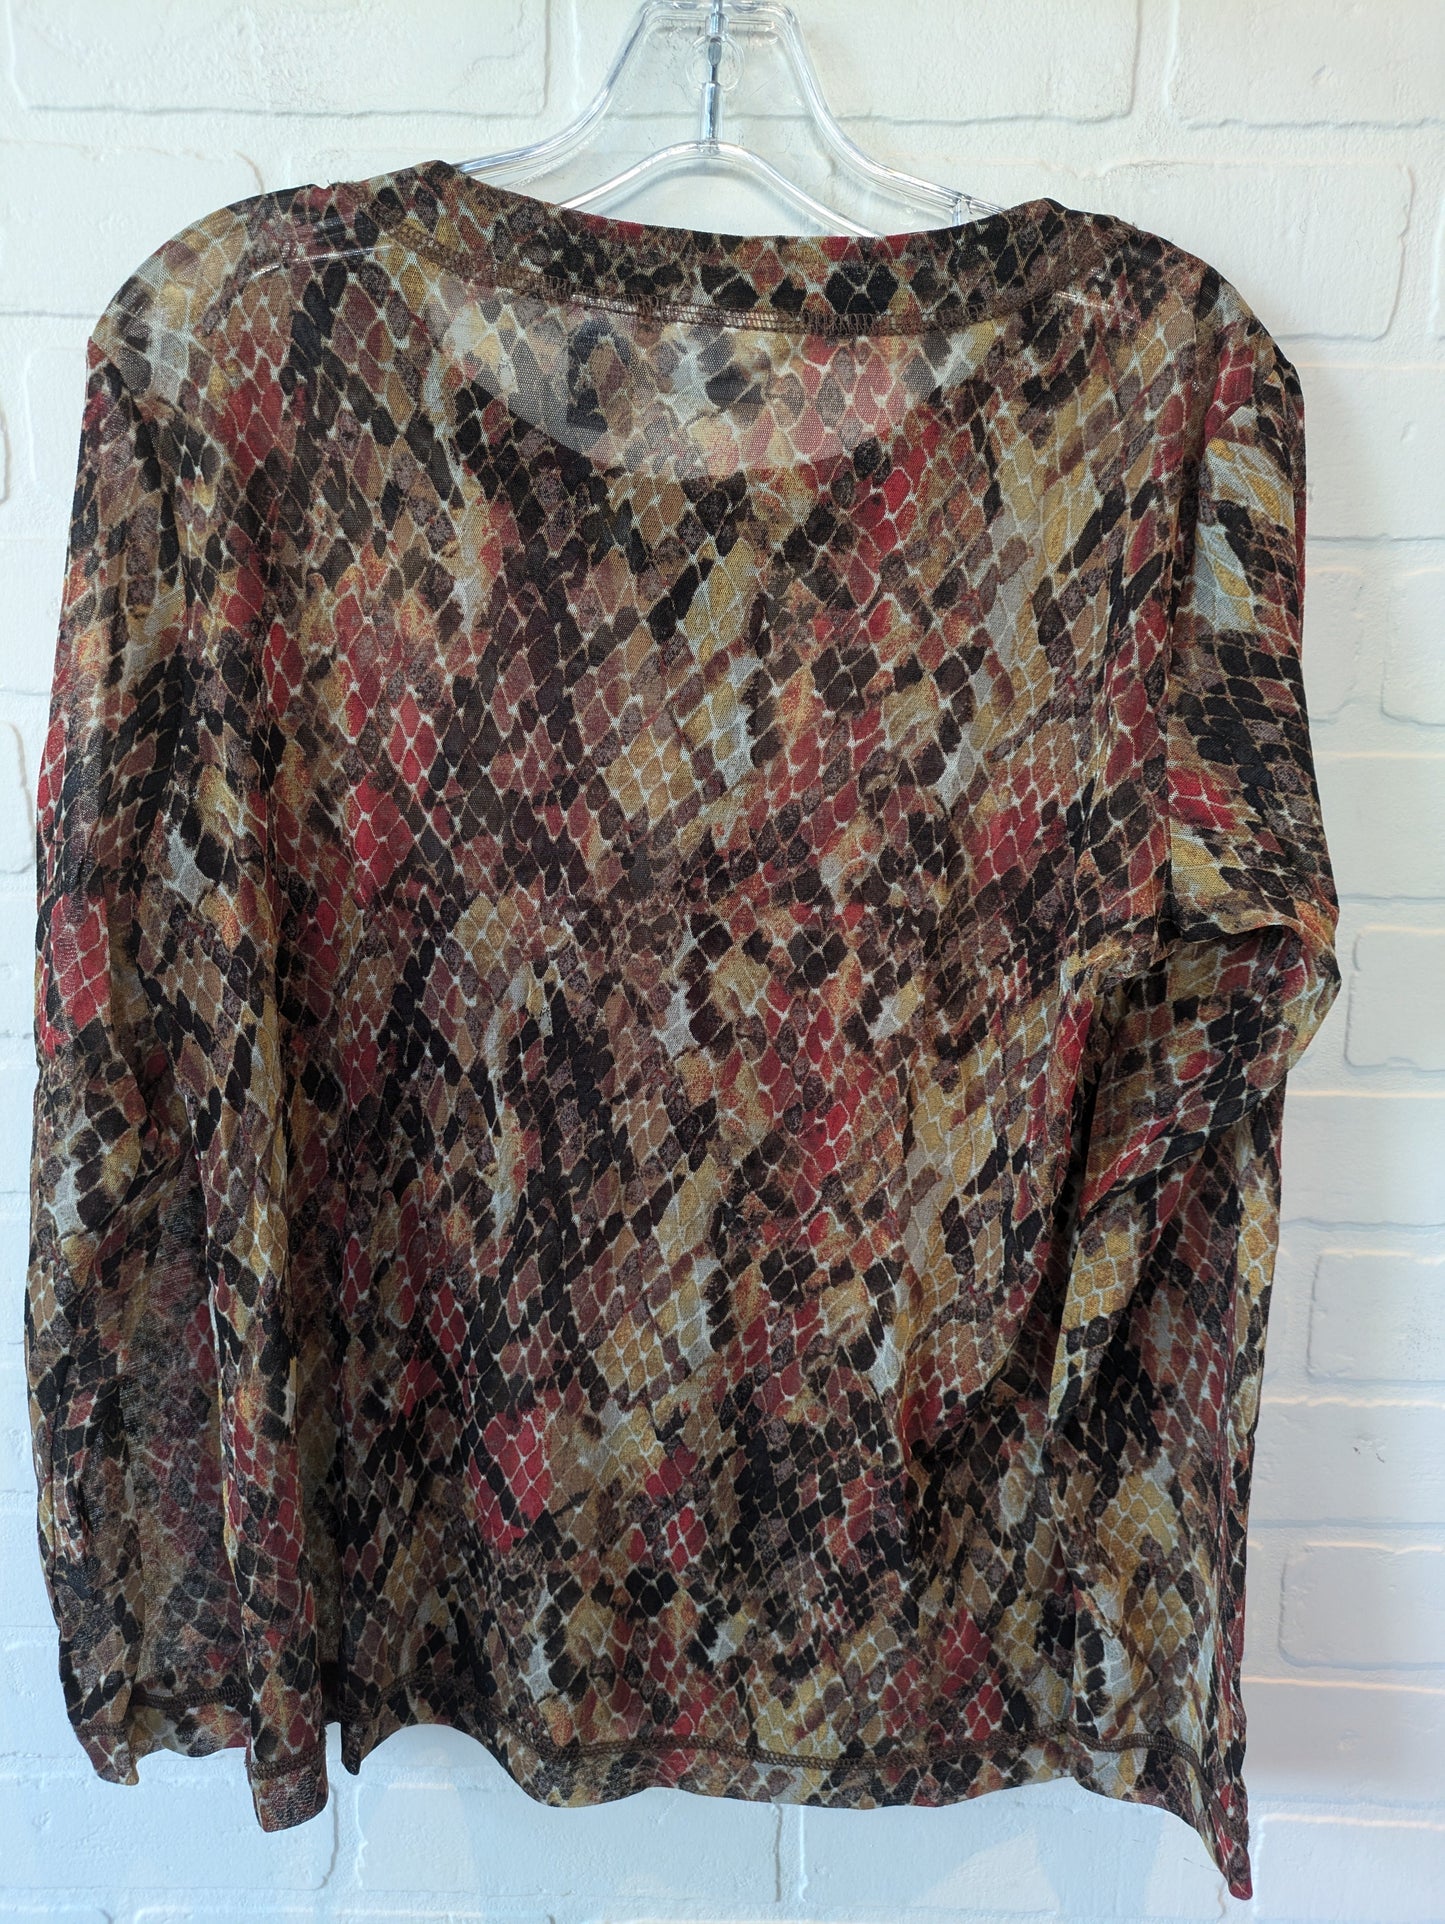 Snakeskin Print Top Long Sleeve Chicos, Size M